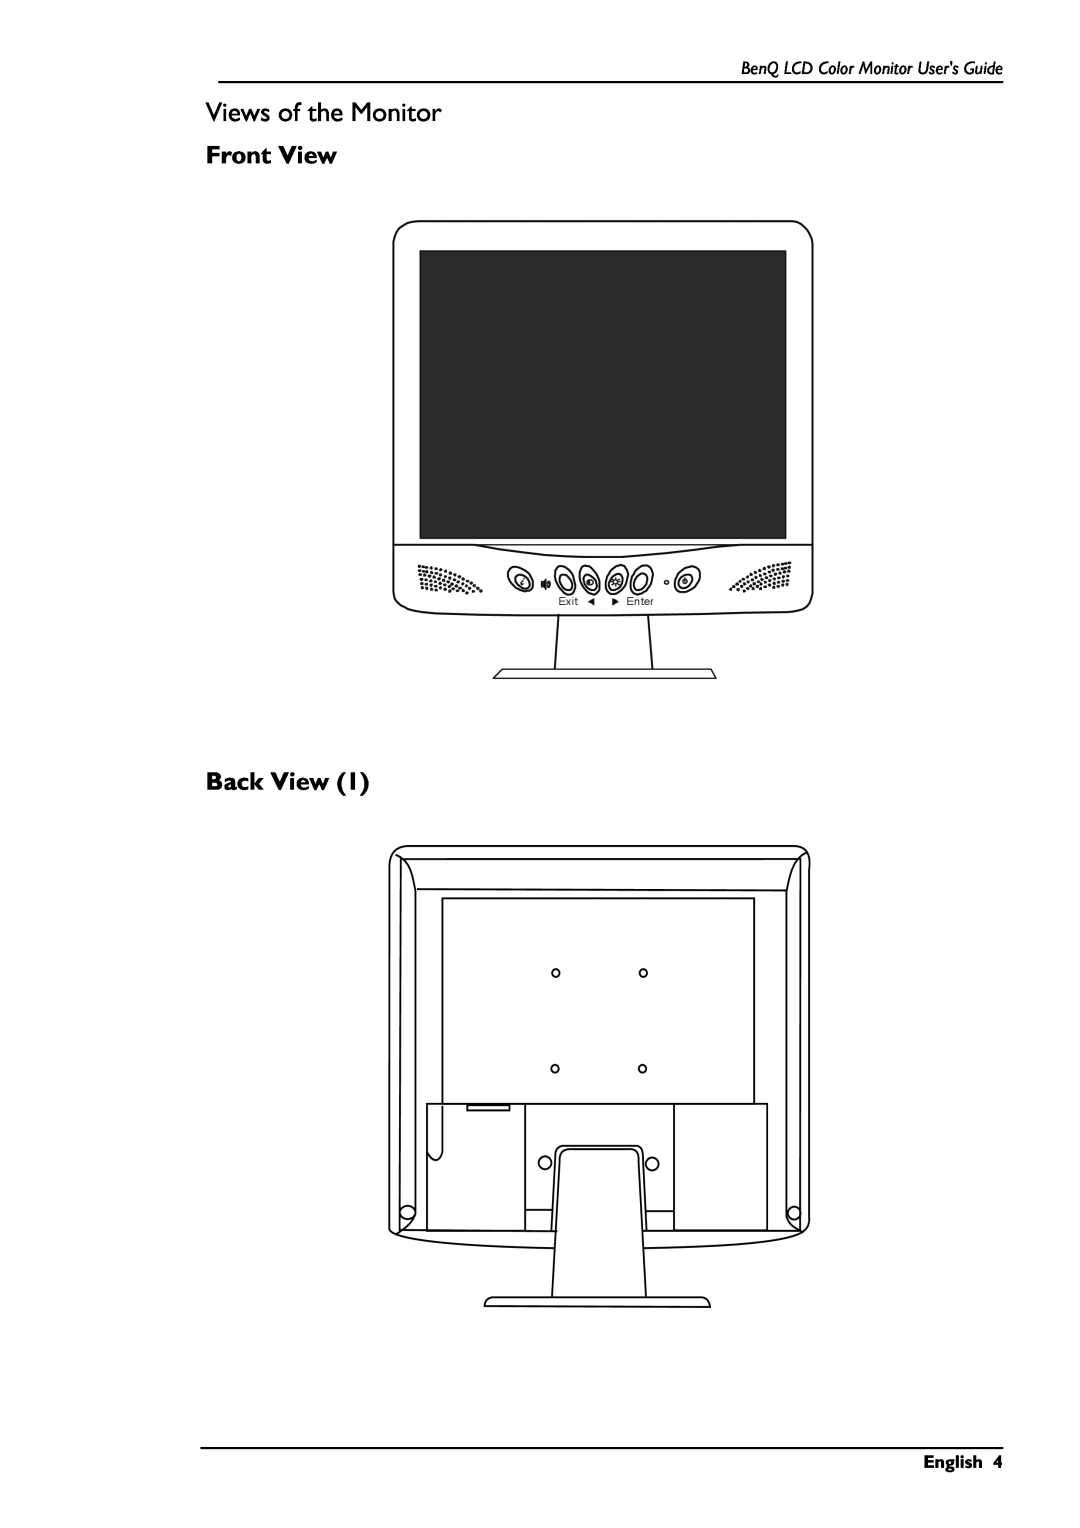 BenQ FP567 user manual Views of the Monitor, Front View, Back View, BenQ LCD Color Monitor Users Guide, English, Exit Enter 